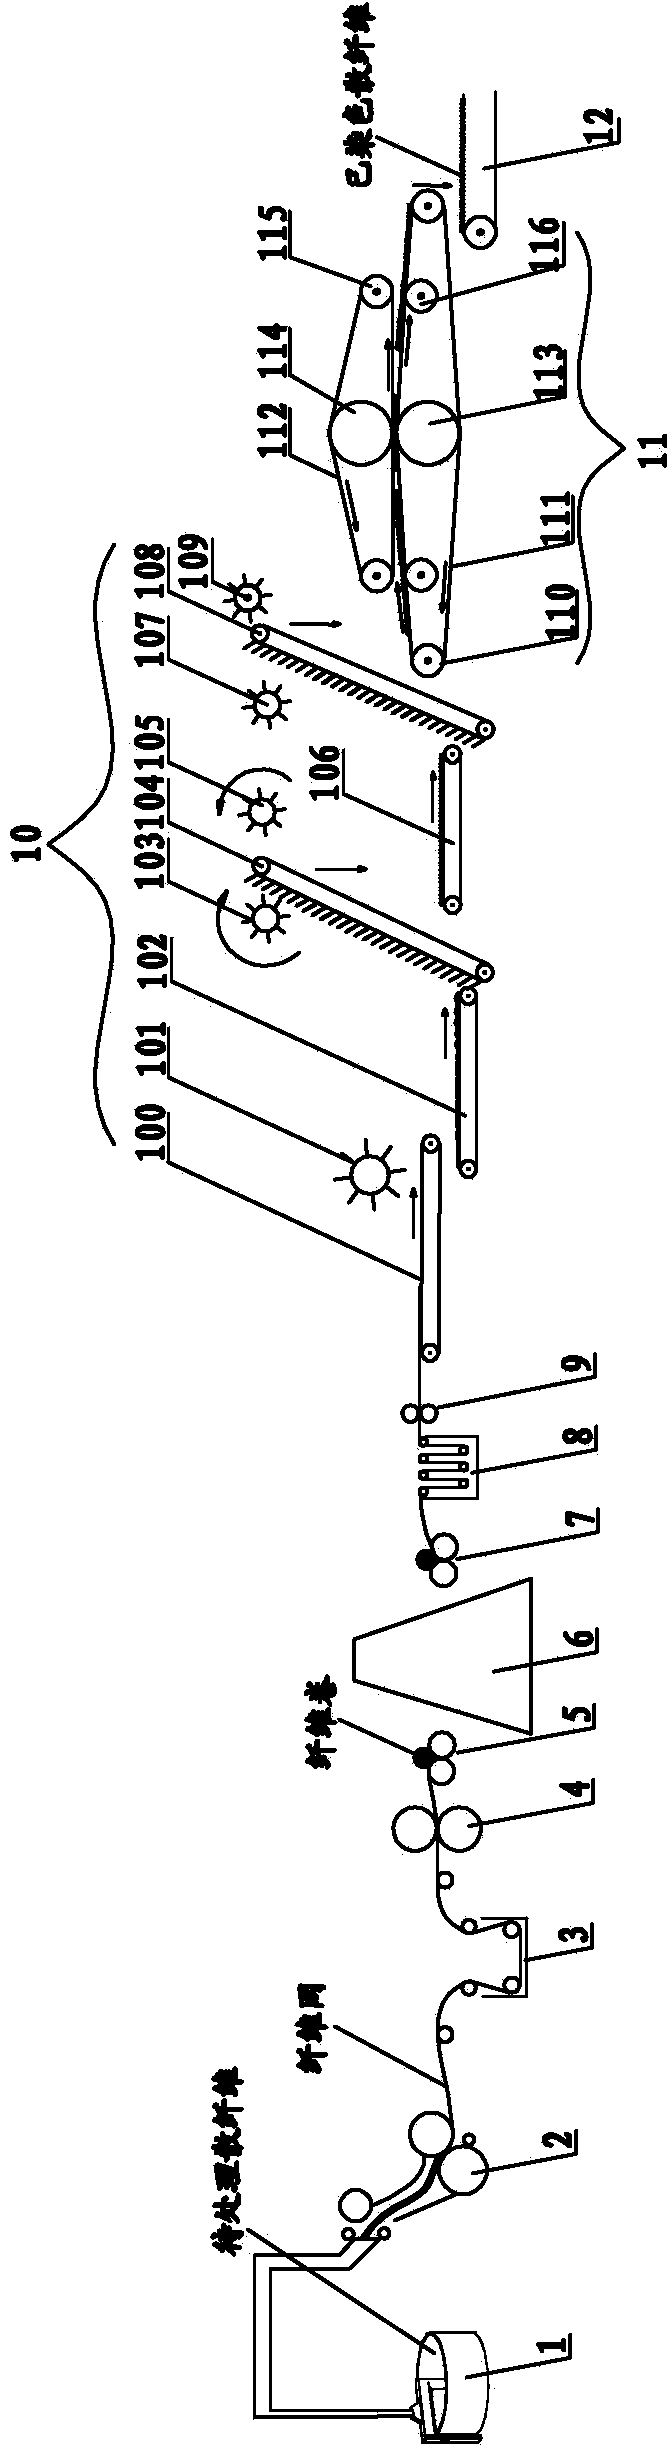 Loose stock dyeing device